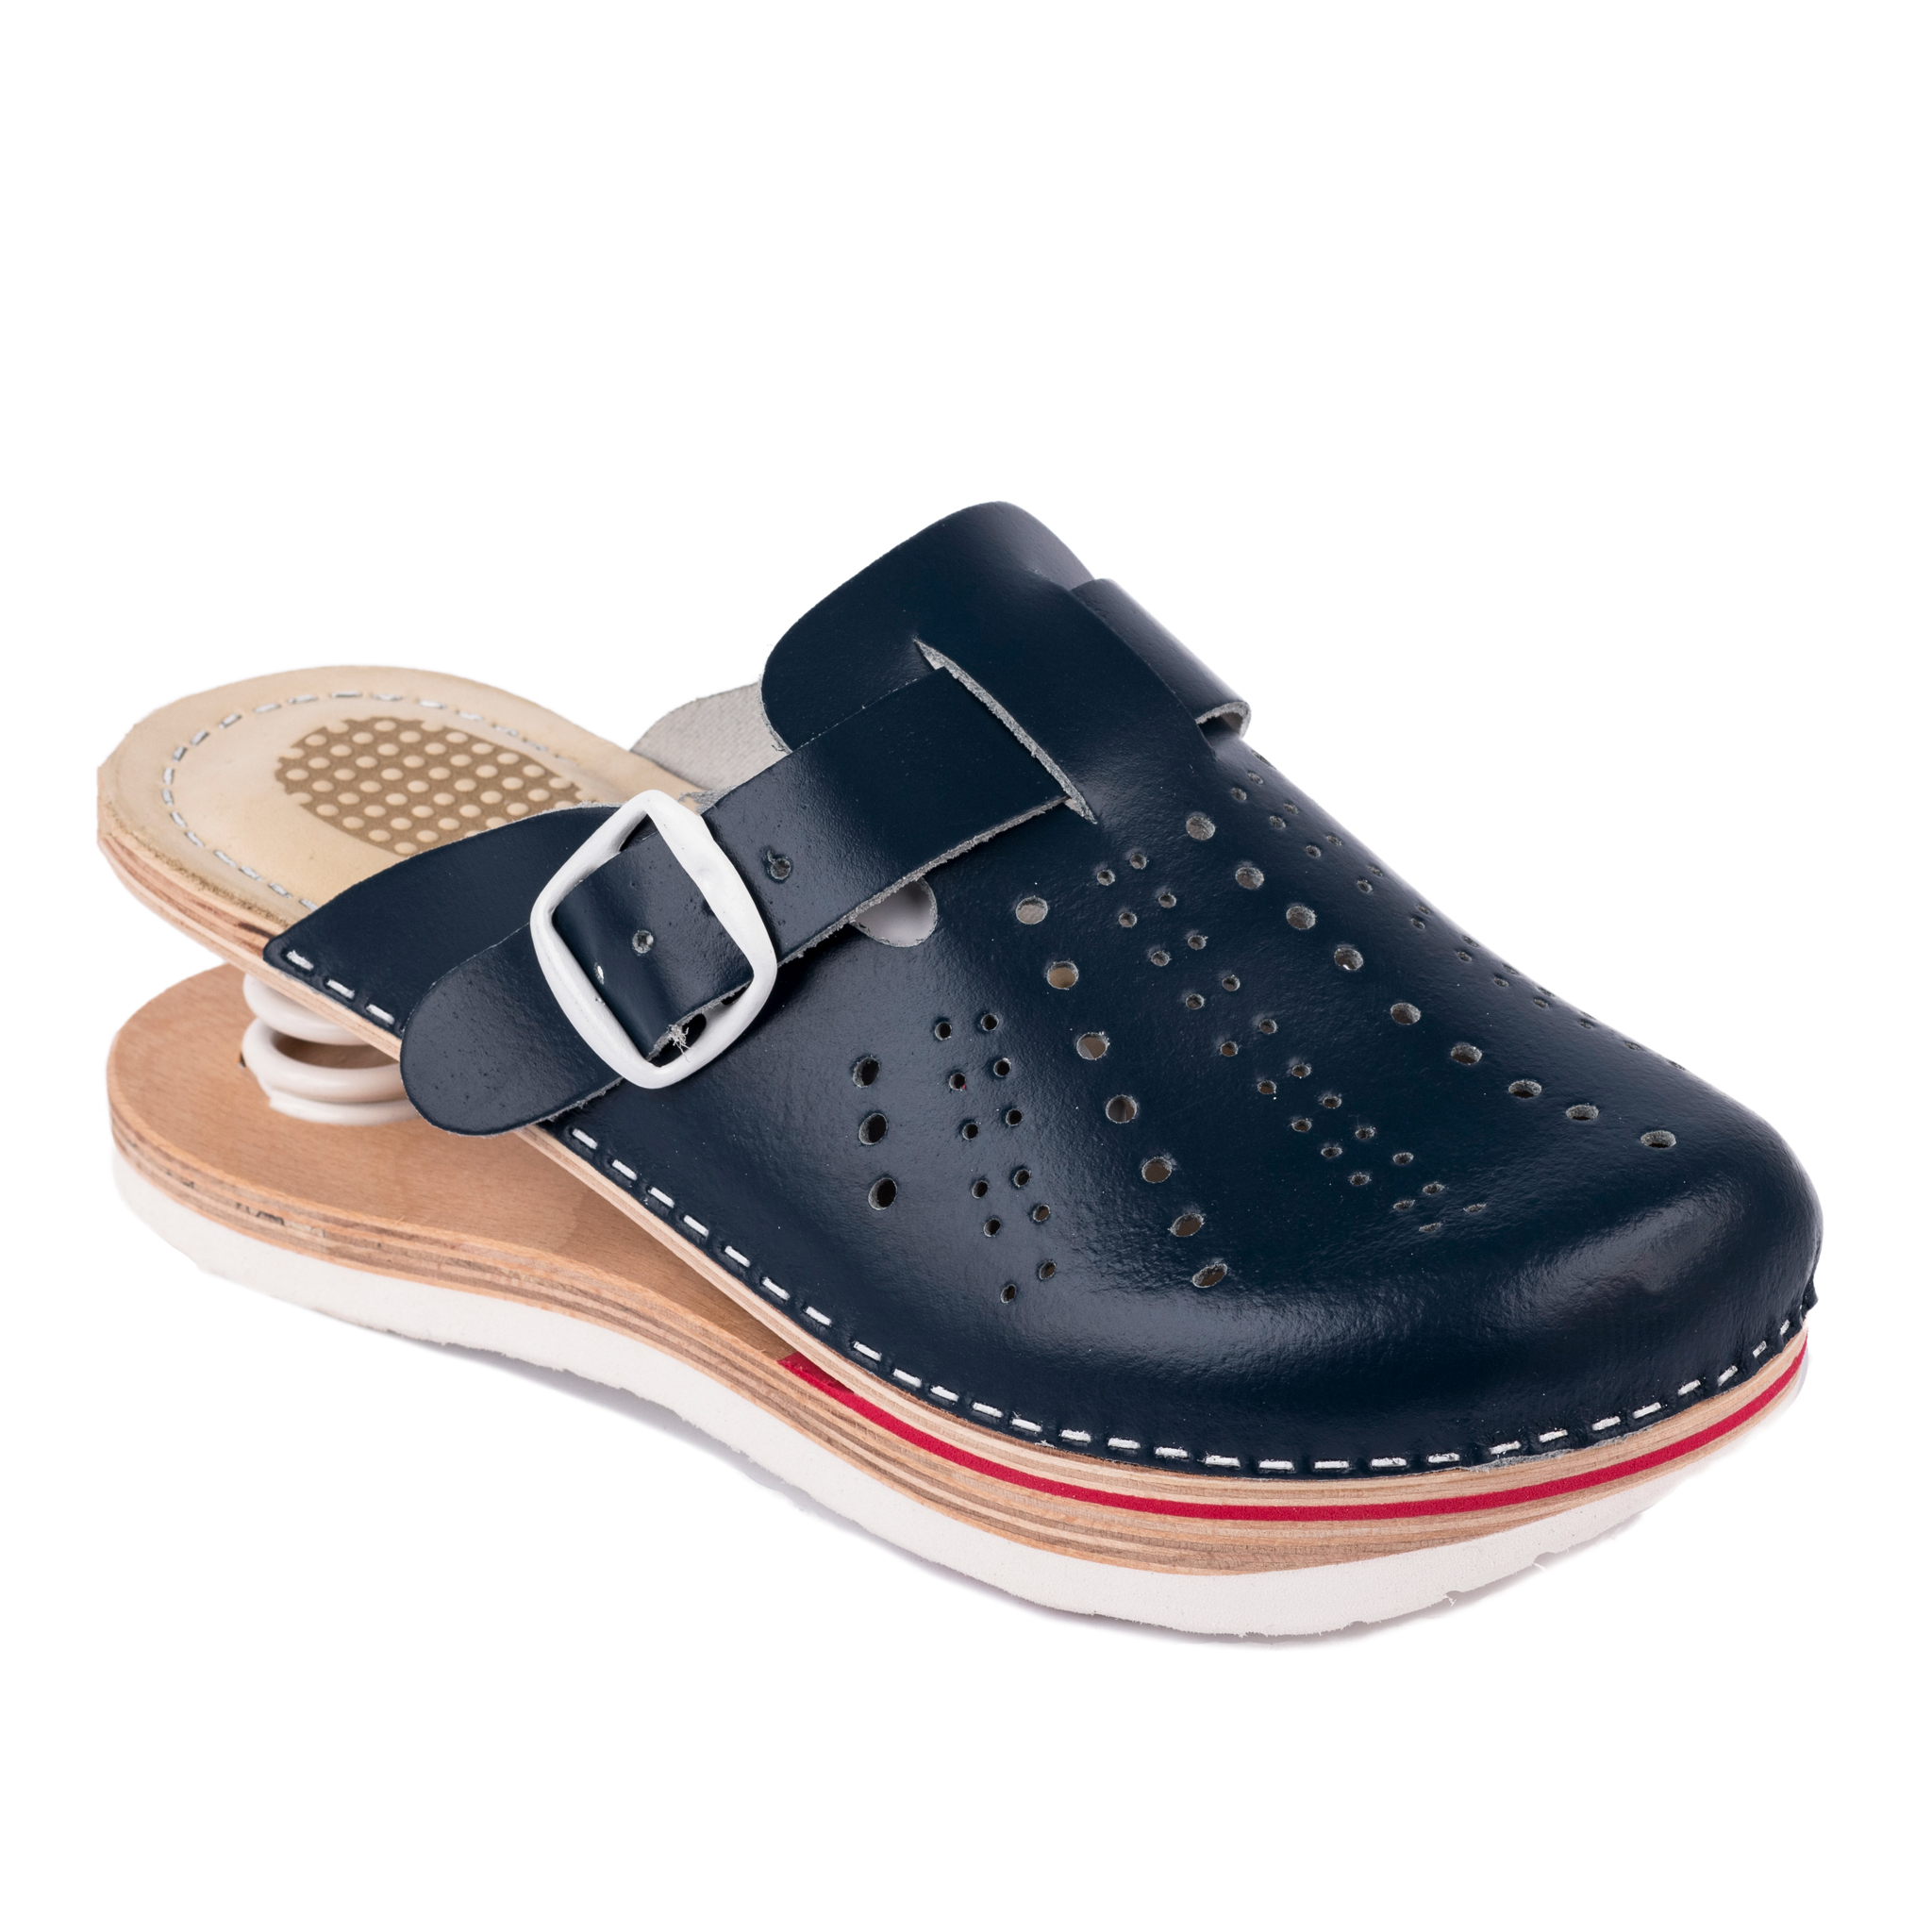 LEATHER CLOGS WITH SPINGS AND BELT - NAVY BLUE